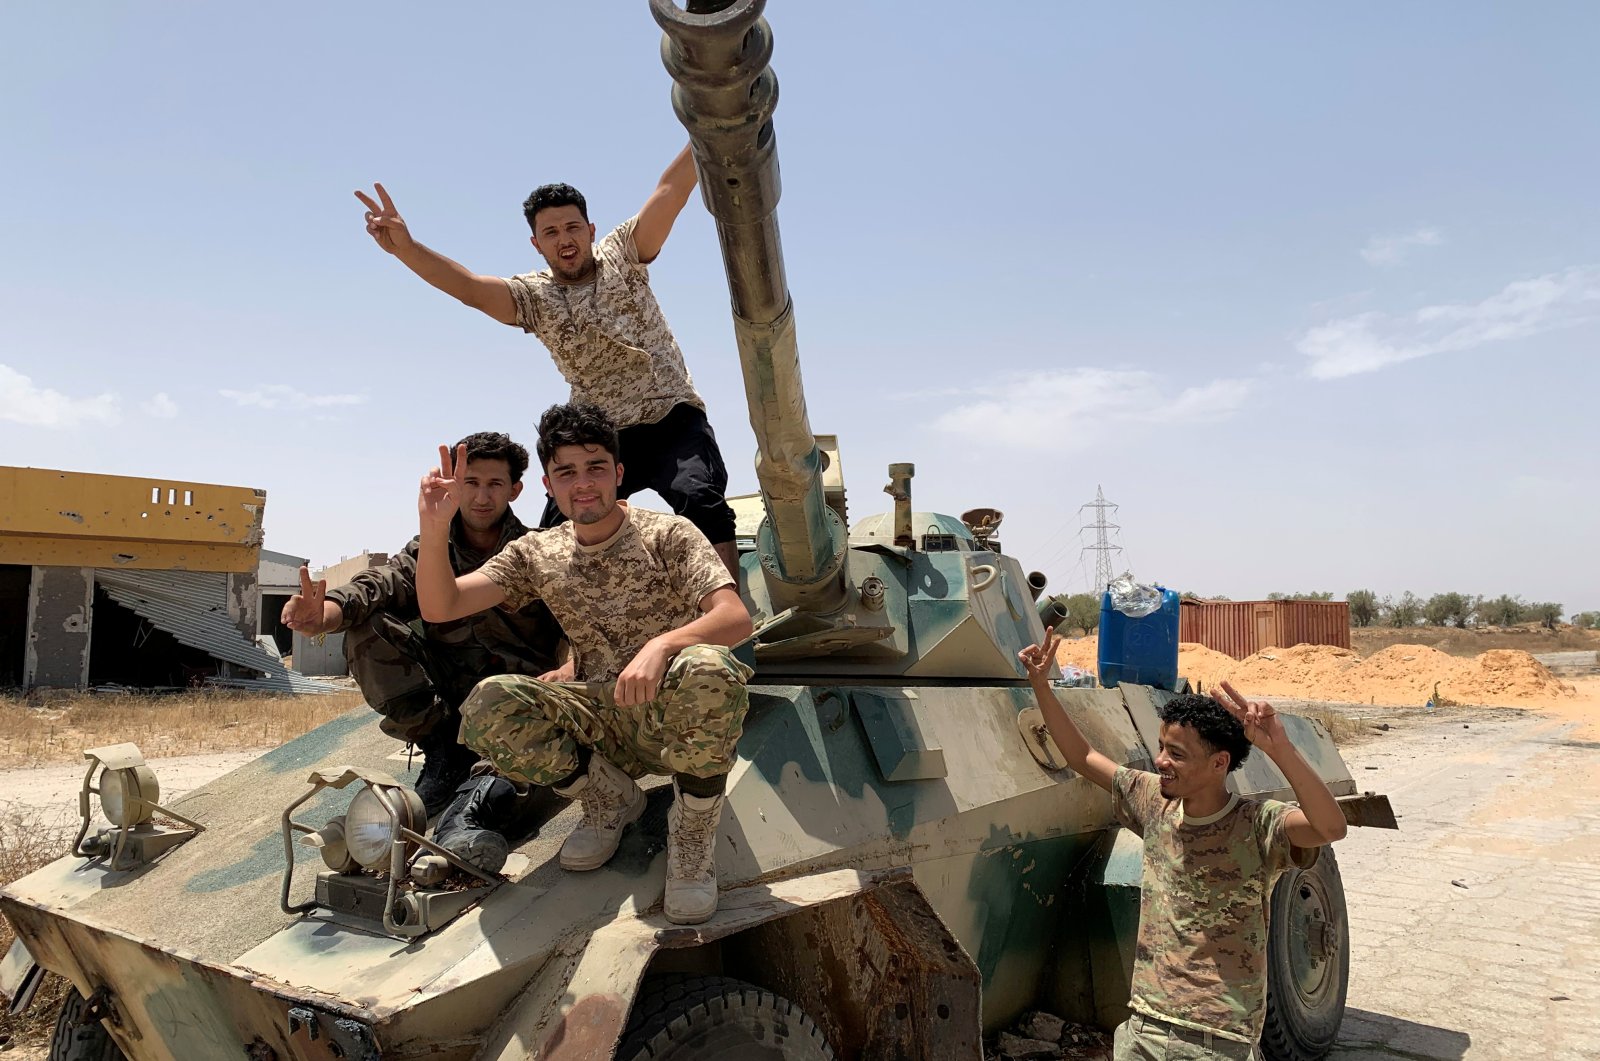 Fighters loyal to Libya's internationally recognized government celebrate after regaining control over the city, in Tripoli, Libya, June 4, 2020. (REUTERS Photo)